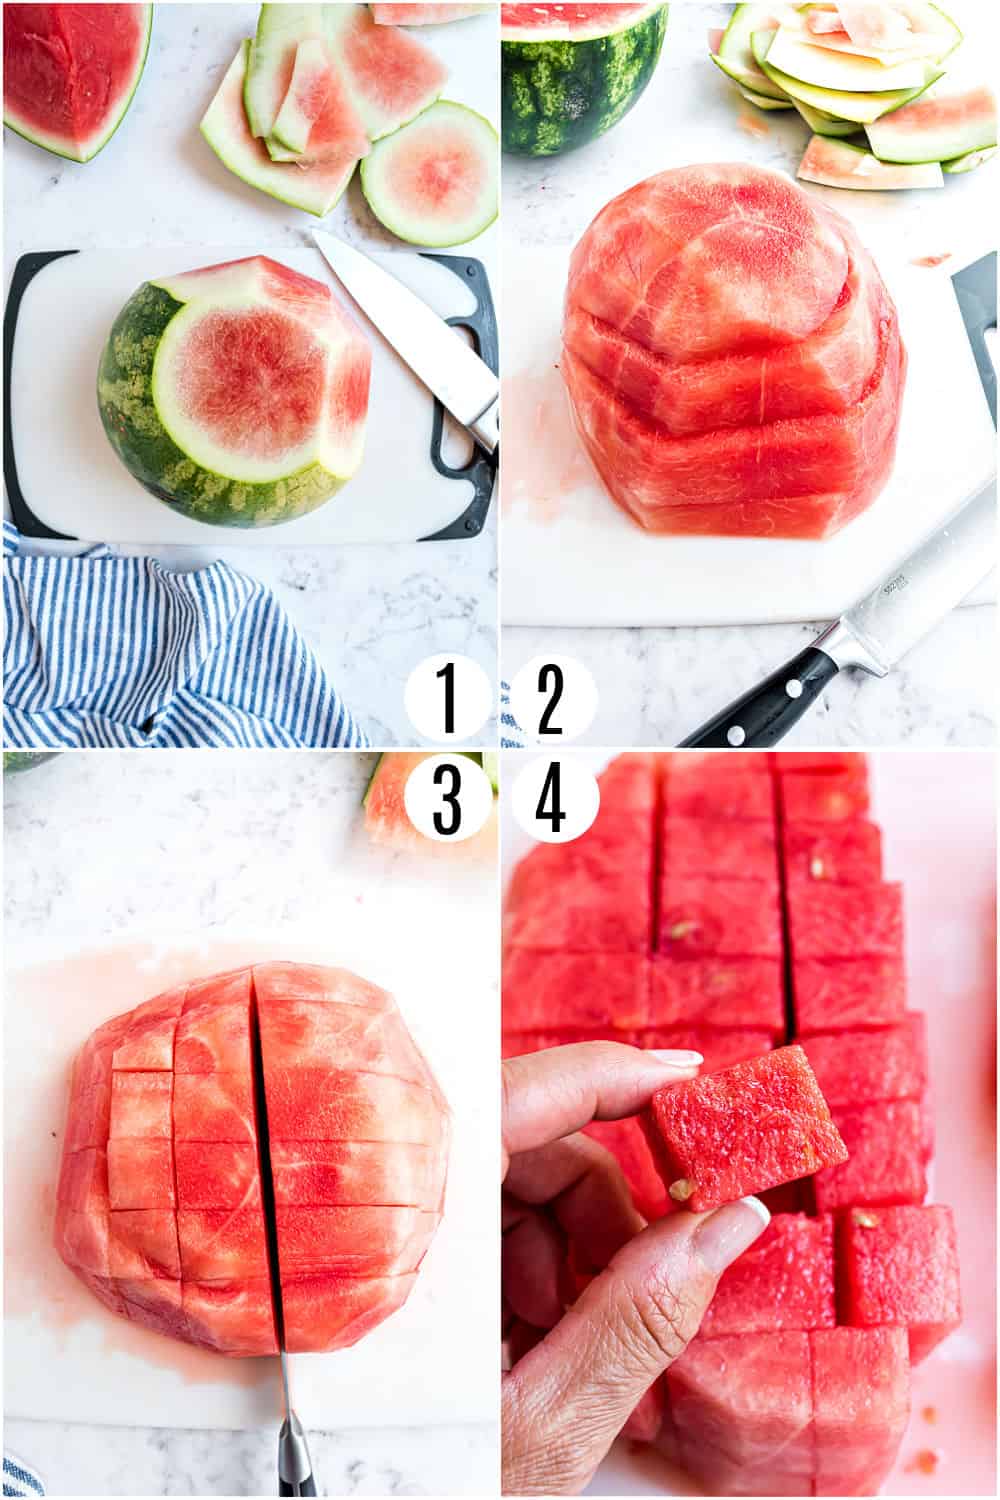 Step by step photos showing how to cut a watermelon into cubes.